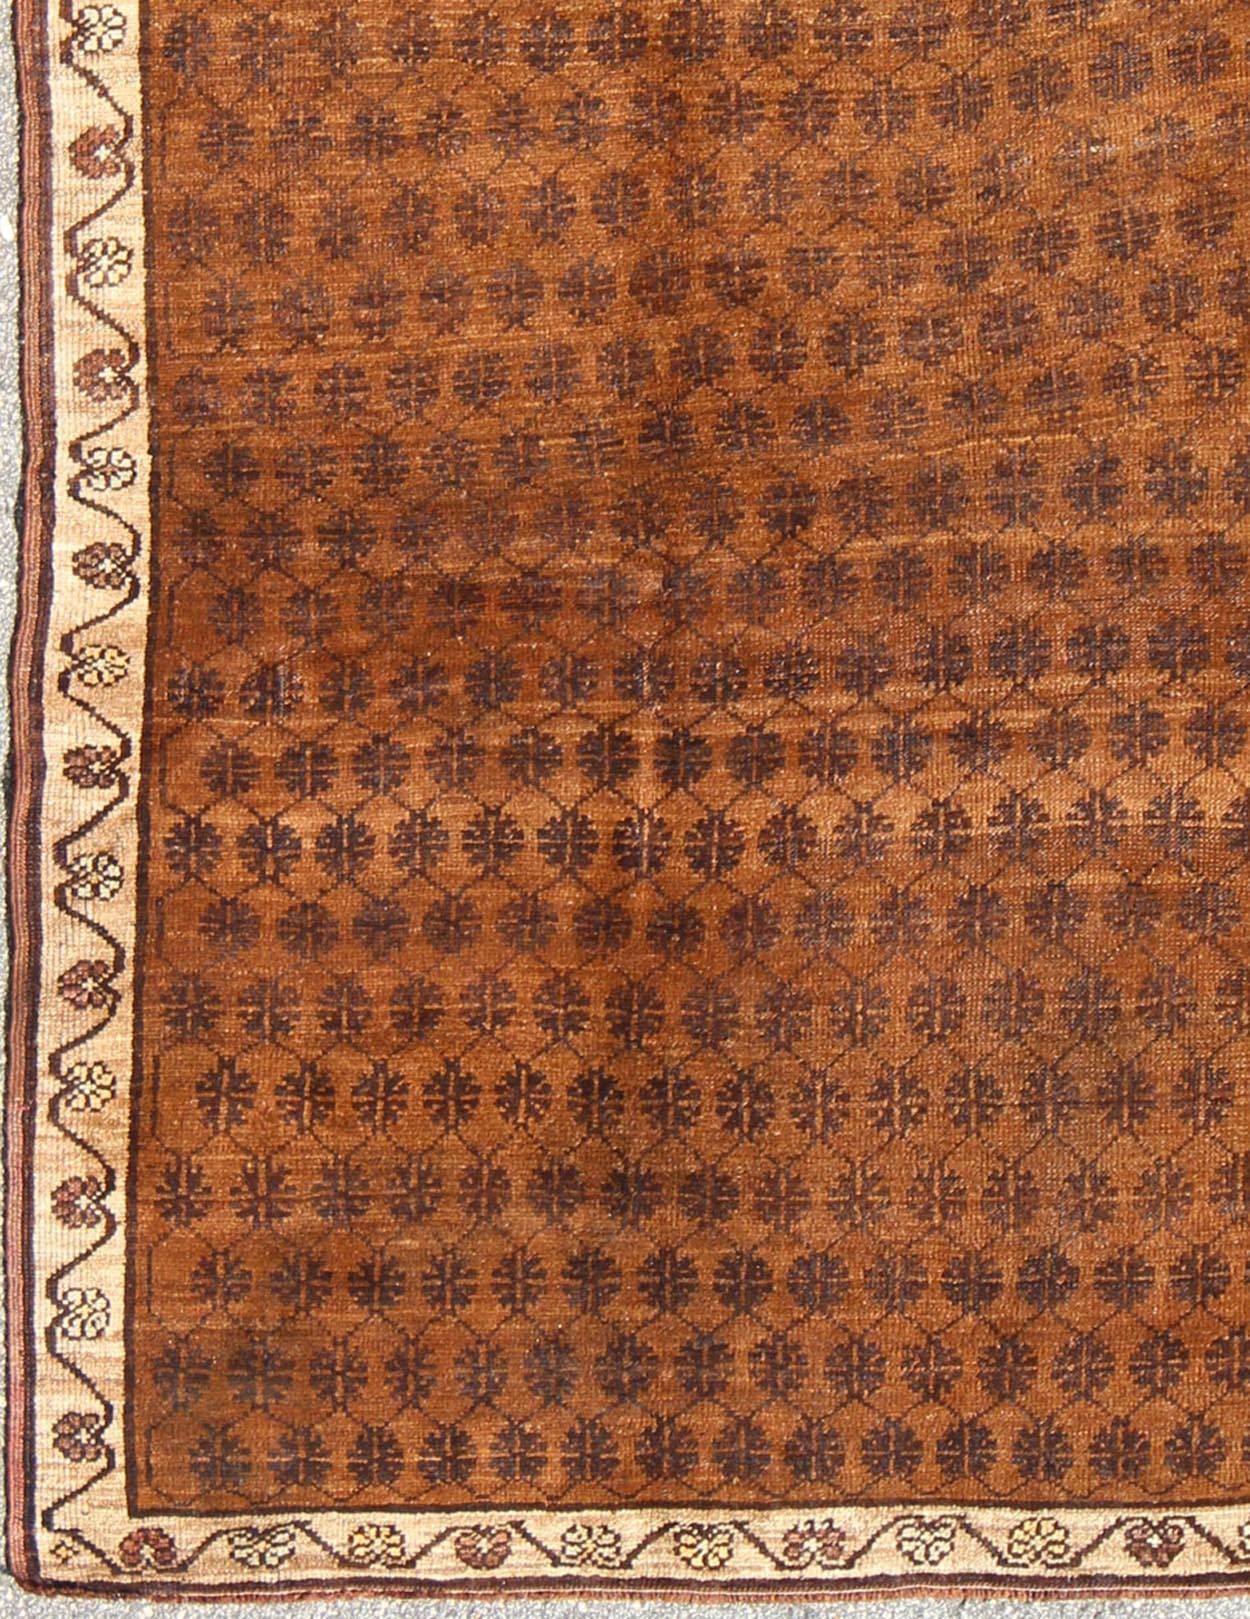 Set on a brown field with an all-over modern/Mid-Century Modern pattern, this beautiful vintage Kars rug (circa mid-20th century) features mocha-colored cross-latch and lattice work. The simple cream border frames the design and consists of